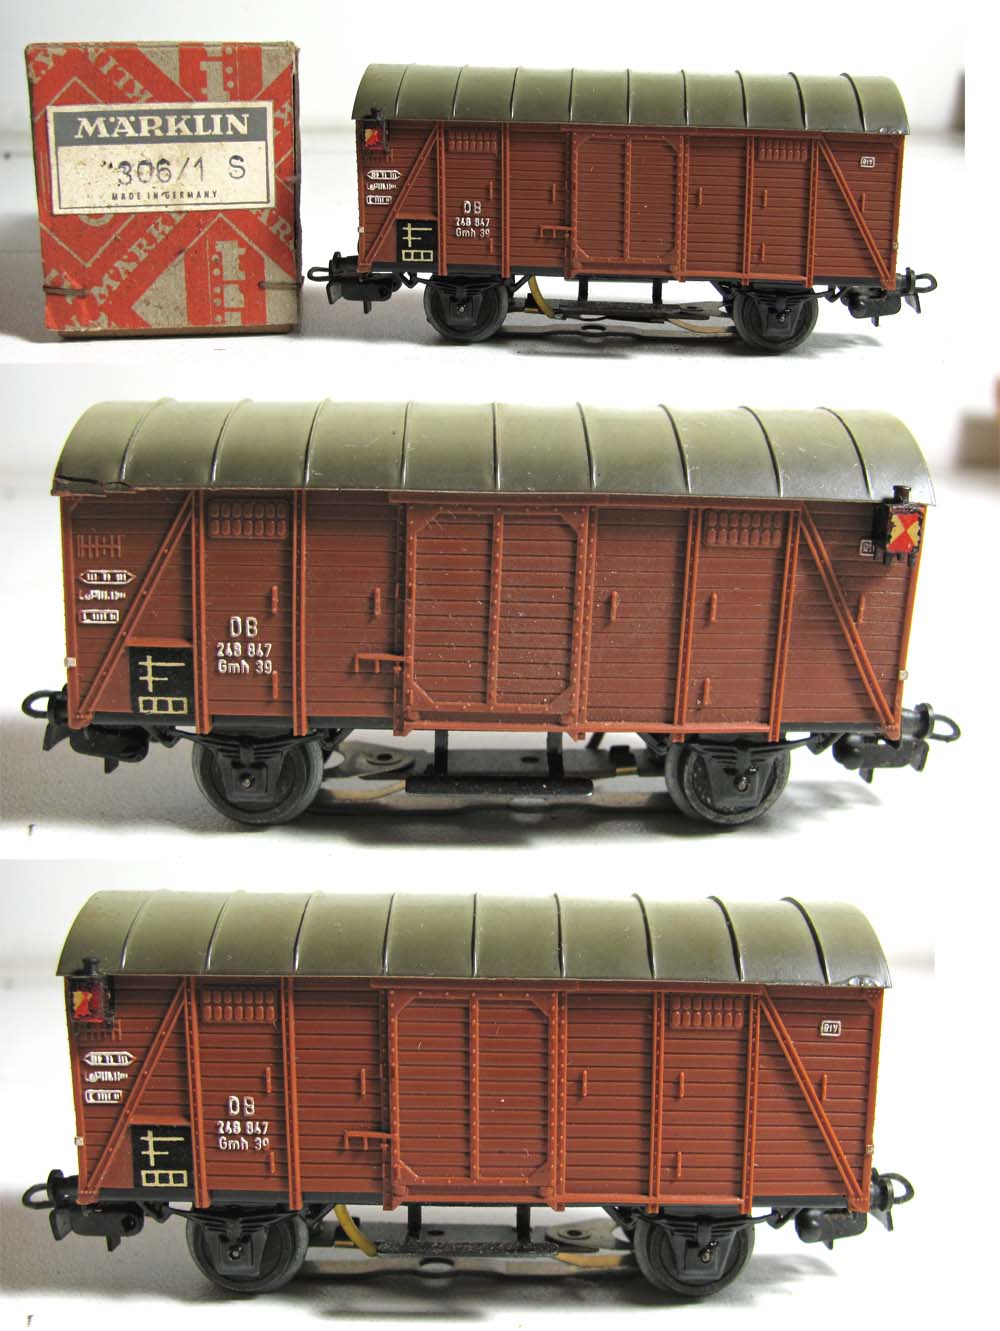 MARKLIN HO GAUGE 306/1 S COVERED GOODS WAGON WITH TAIL LIGHTS